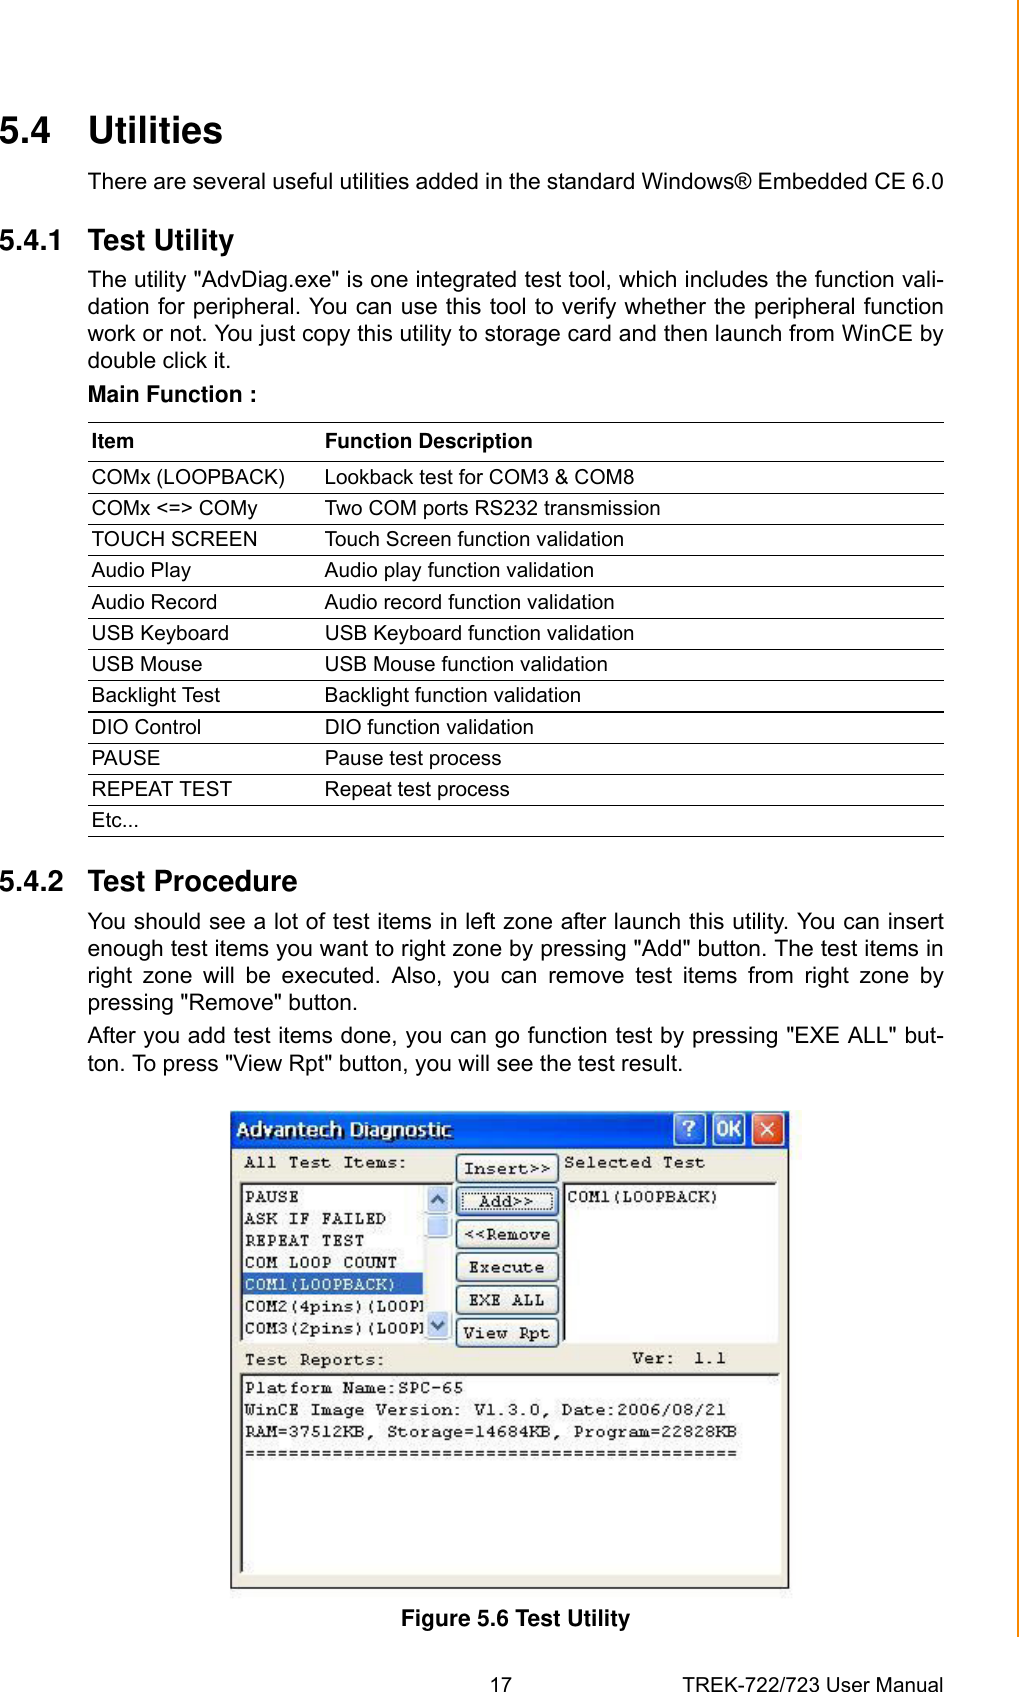 17 TREK-722/723 User ManualChapter 5 Software Functionality5.4 UtilitiesThere are several useful utilities added in the standard Windows® Embedded CE 6.05.4.1 Test UtilityThe utility &quot;AdvDiag.exe&quot; is one integrated test tool, which includes the function vali-dation for peripheral. You can use this tool to verify whether the peripheral functionwork or not. You just copy this utility to storage card and then launch from WinCE bydouble click it.Main Function :5.4.2 Test ProcedureYou should see a lot of test items in left zone after launch this utility. You can insertenough test items you want to right zone by pressing &quot;Add&quot; button. The test items inright  zone  will  be  executed.  Also,  you  can  remove  test  items  from  right  zone  bypressing &quot;Remove&quot; button. After you add test items done, you can go function test by pressing &quot;EXE ALL&quot; but-ton. To press &quot;View Rpt&quot; button, you will see the test result.Figure 5.6 Test UtilityItem Function DescriptionCOMx (LOOPBACK) Lookback test for COM3 &amp; COM8COMx &lt;=&gt; COMy Two COM ports RS232 transmissionTOUCH SCREEN Touch Screen function validationAudio Play Audio play function validationAudio Record Audio record function validationUSB Keyboard USB Keyboard function validationUSB Mouse USB Mouse function validationBacklight Test Backlight function validationDIO Control DIO function validationPAUSE Pause test processREPEAT TEST Repeat test processEtc...